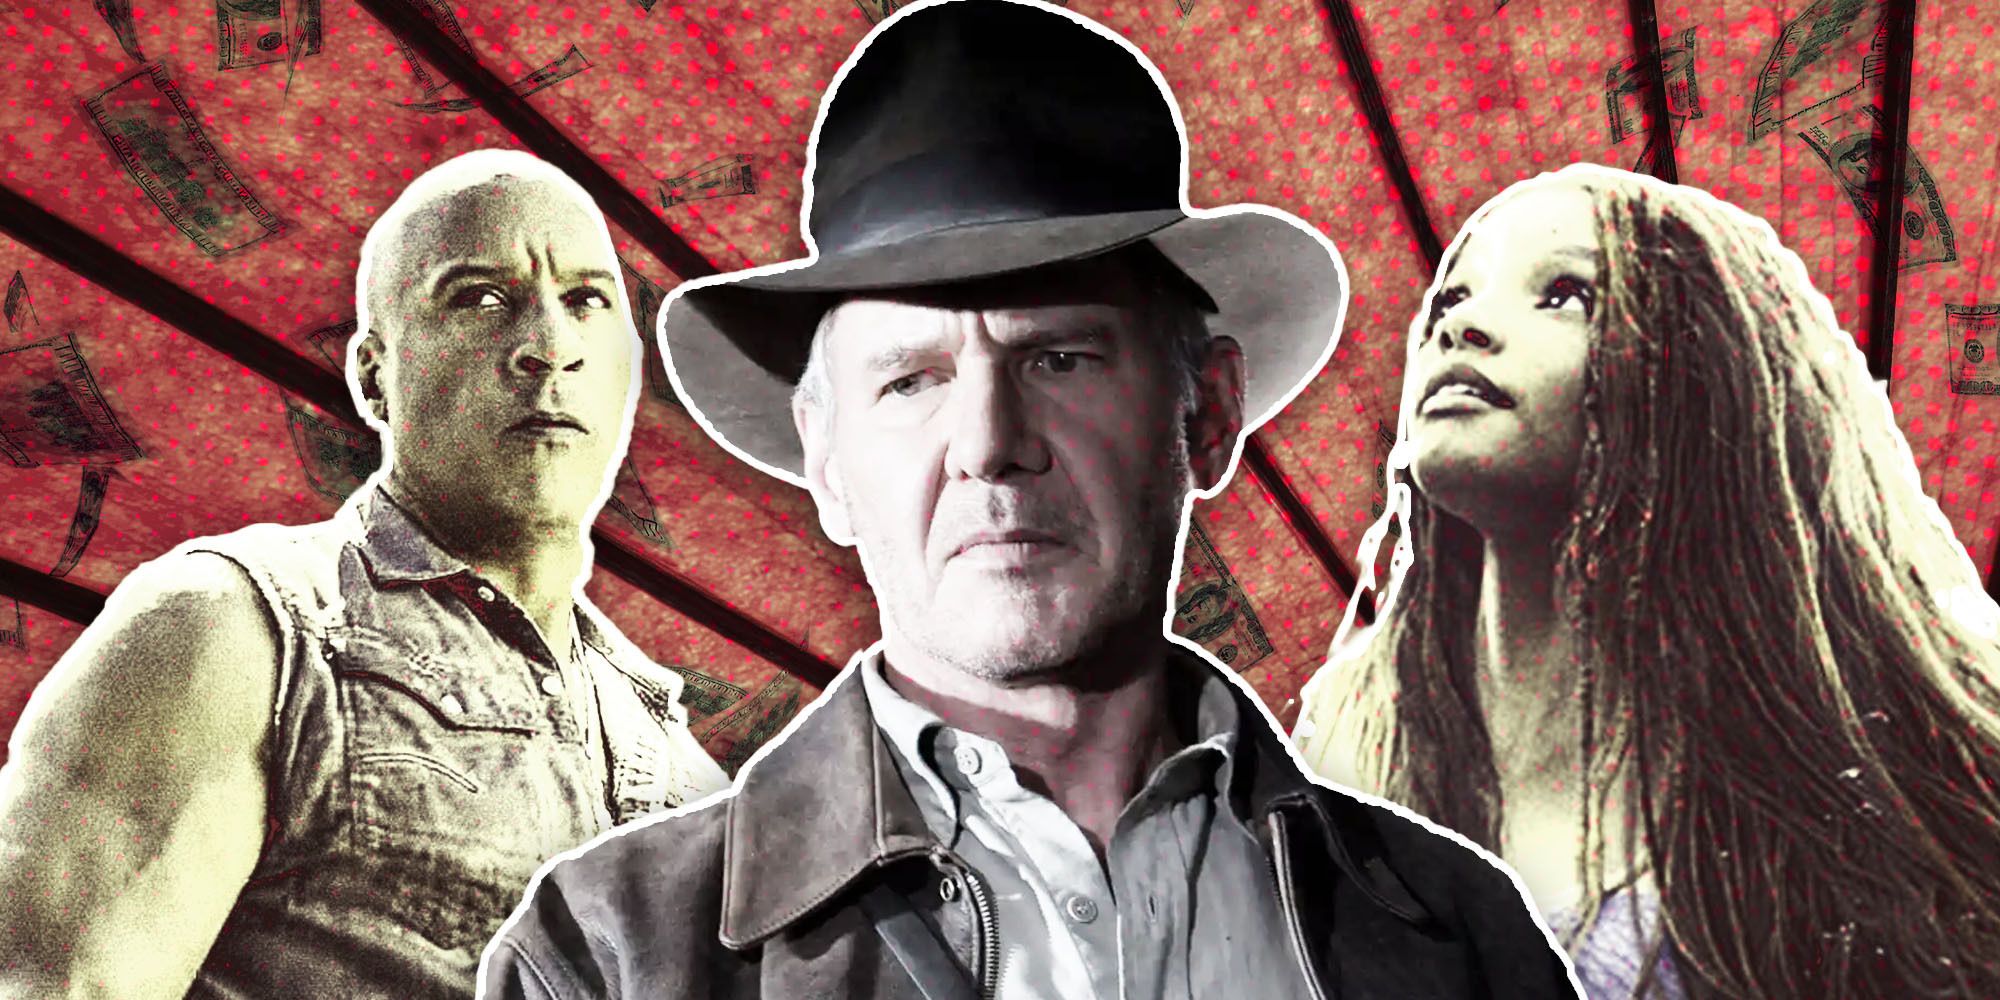 Dom Toretto, Indiana Jones, and Ariel against a red and black background.